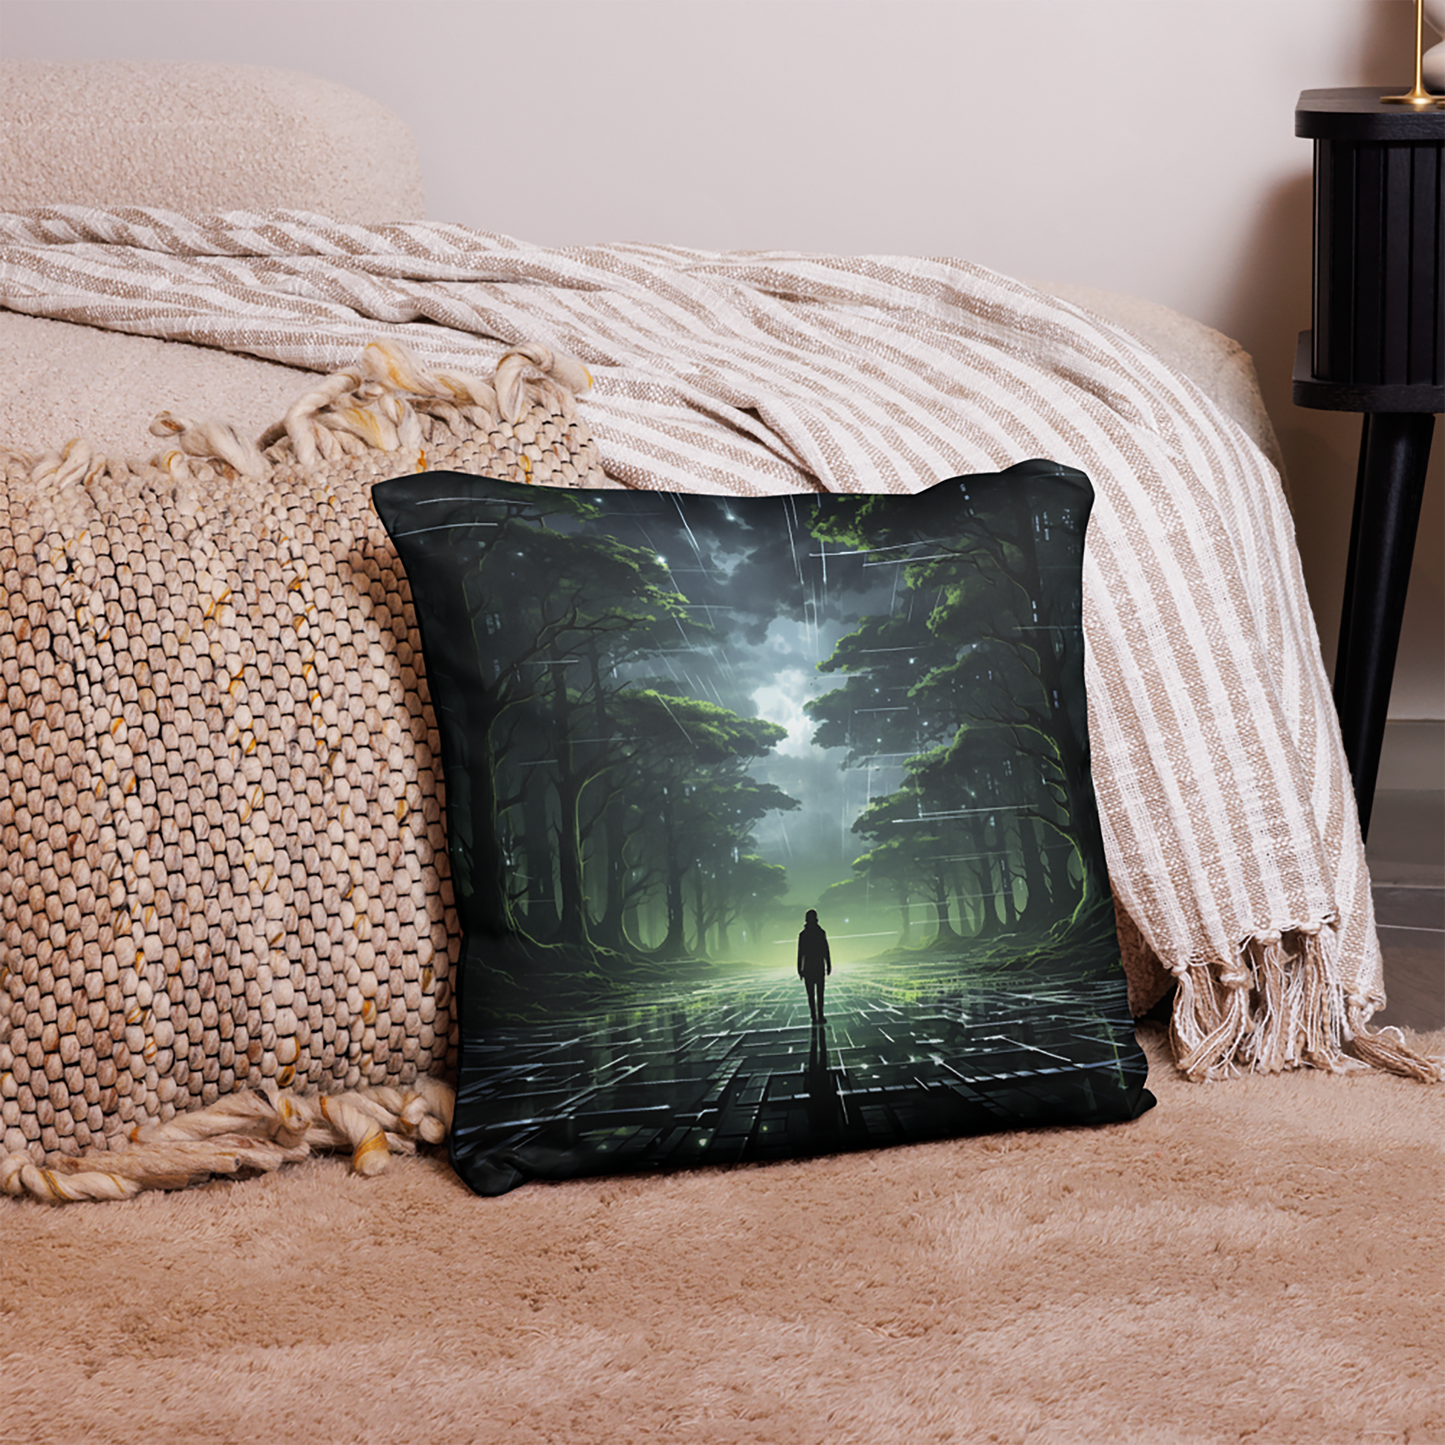 Future Throw Pillow Emerald Night Forest Polyester Decorative Cushion 18x18